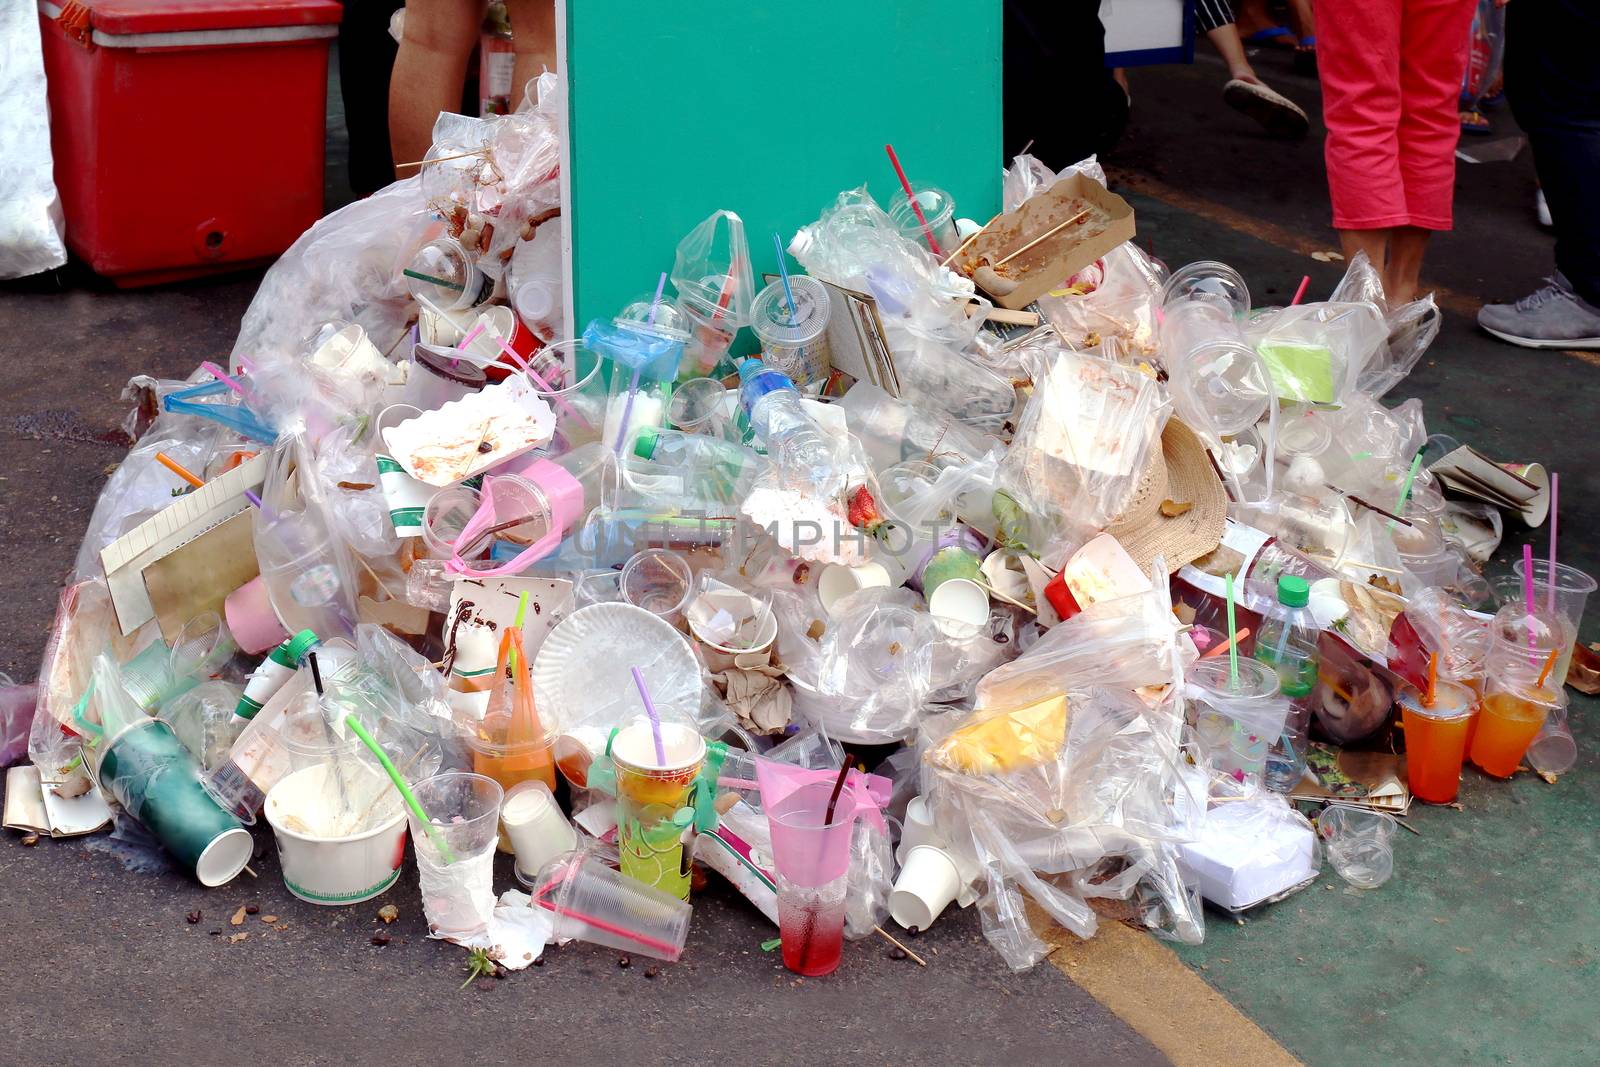 Garbage, Trash, Waste, Plastic Waste Pollution, Pile of Garbage Plastic Waste Bottle and Bag Foam tray many on floor